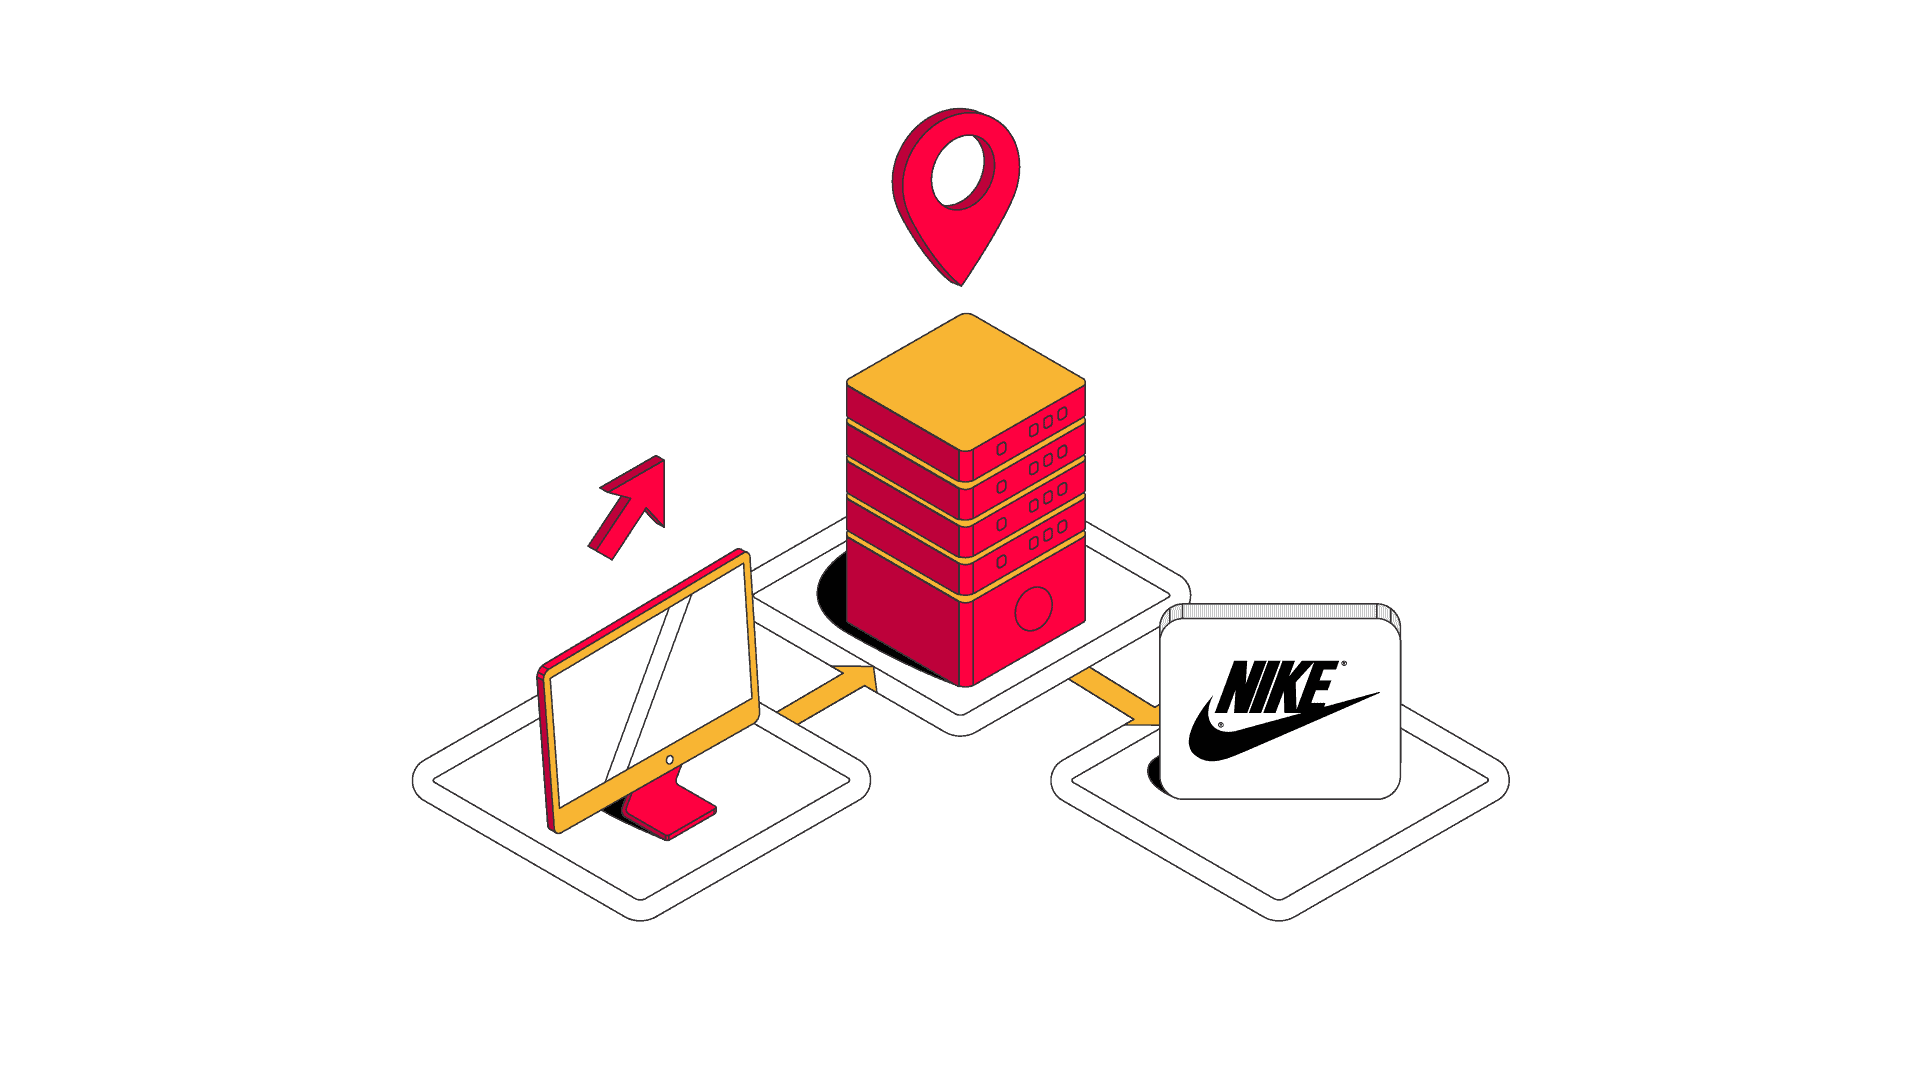 A computer linking to a proxy server linking to a Nike logo